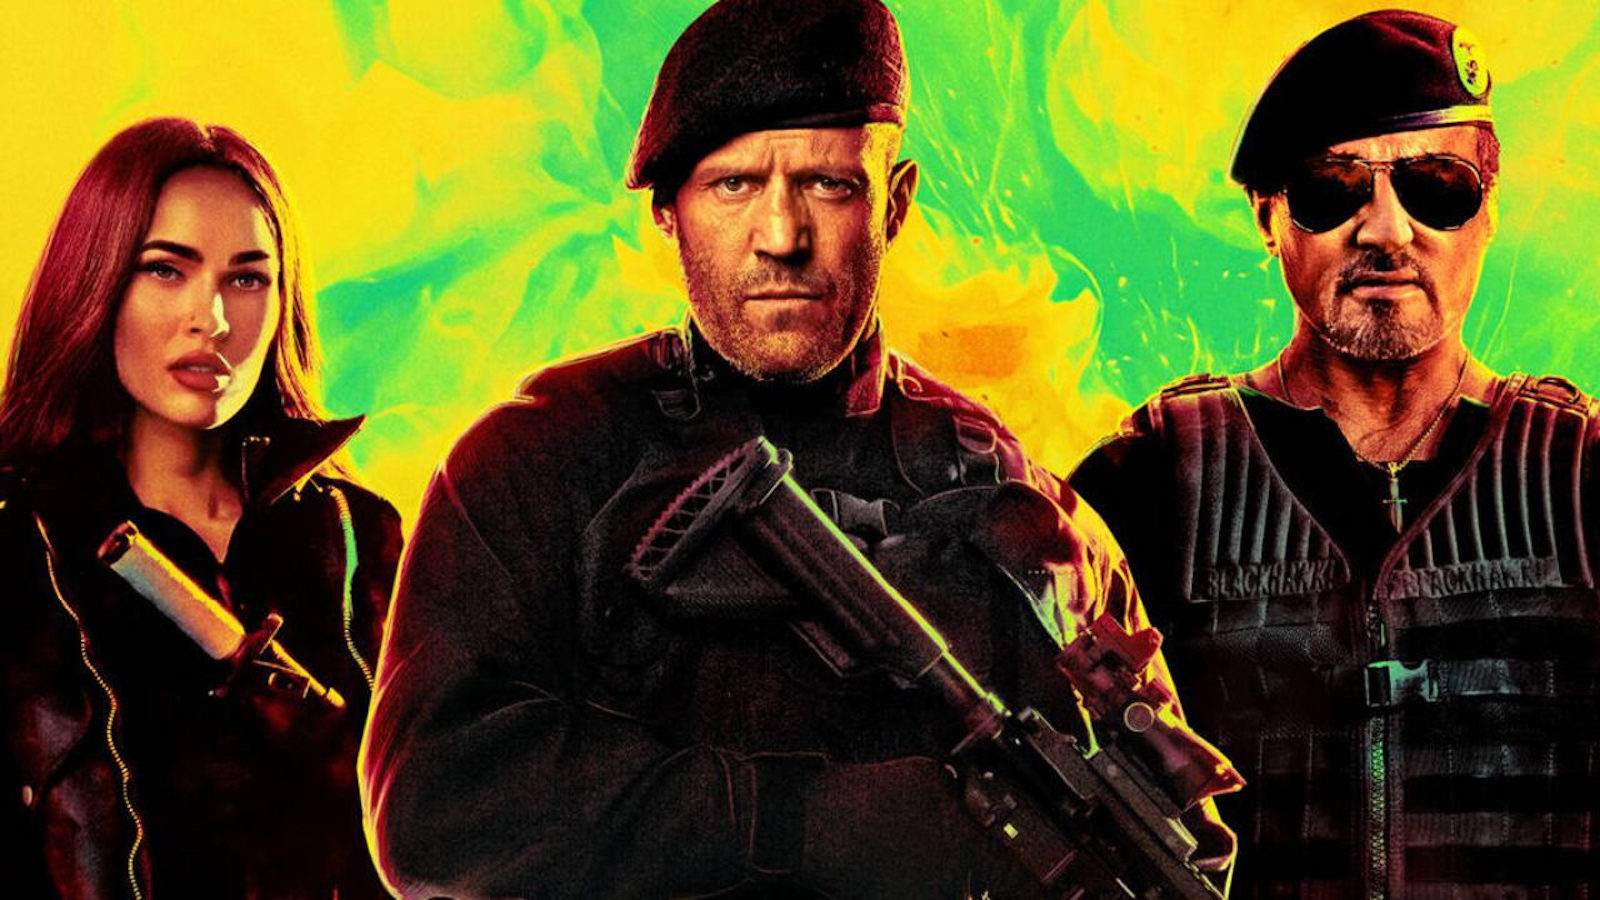 Expendables 4: action, violence and Megan Fox in lingerie in the red band trailer of the film with Stallone & Co.